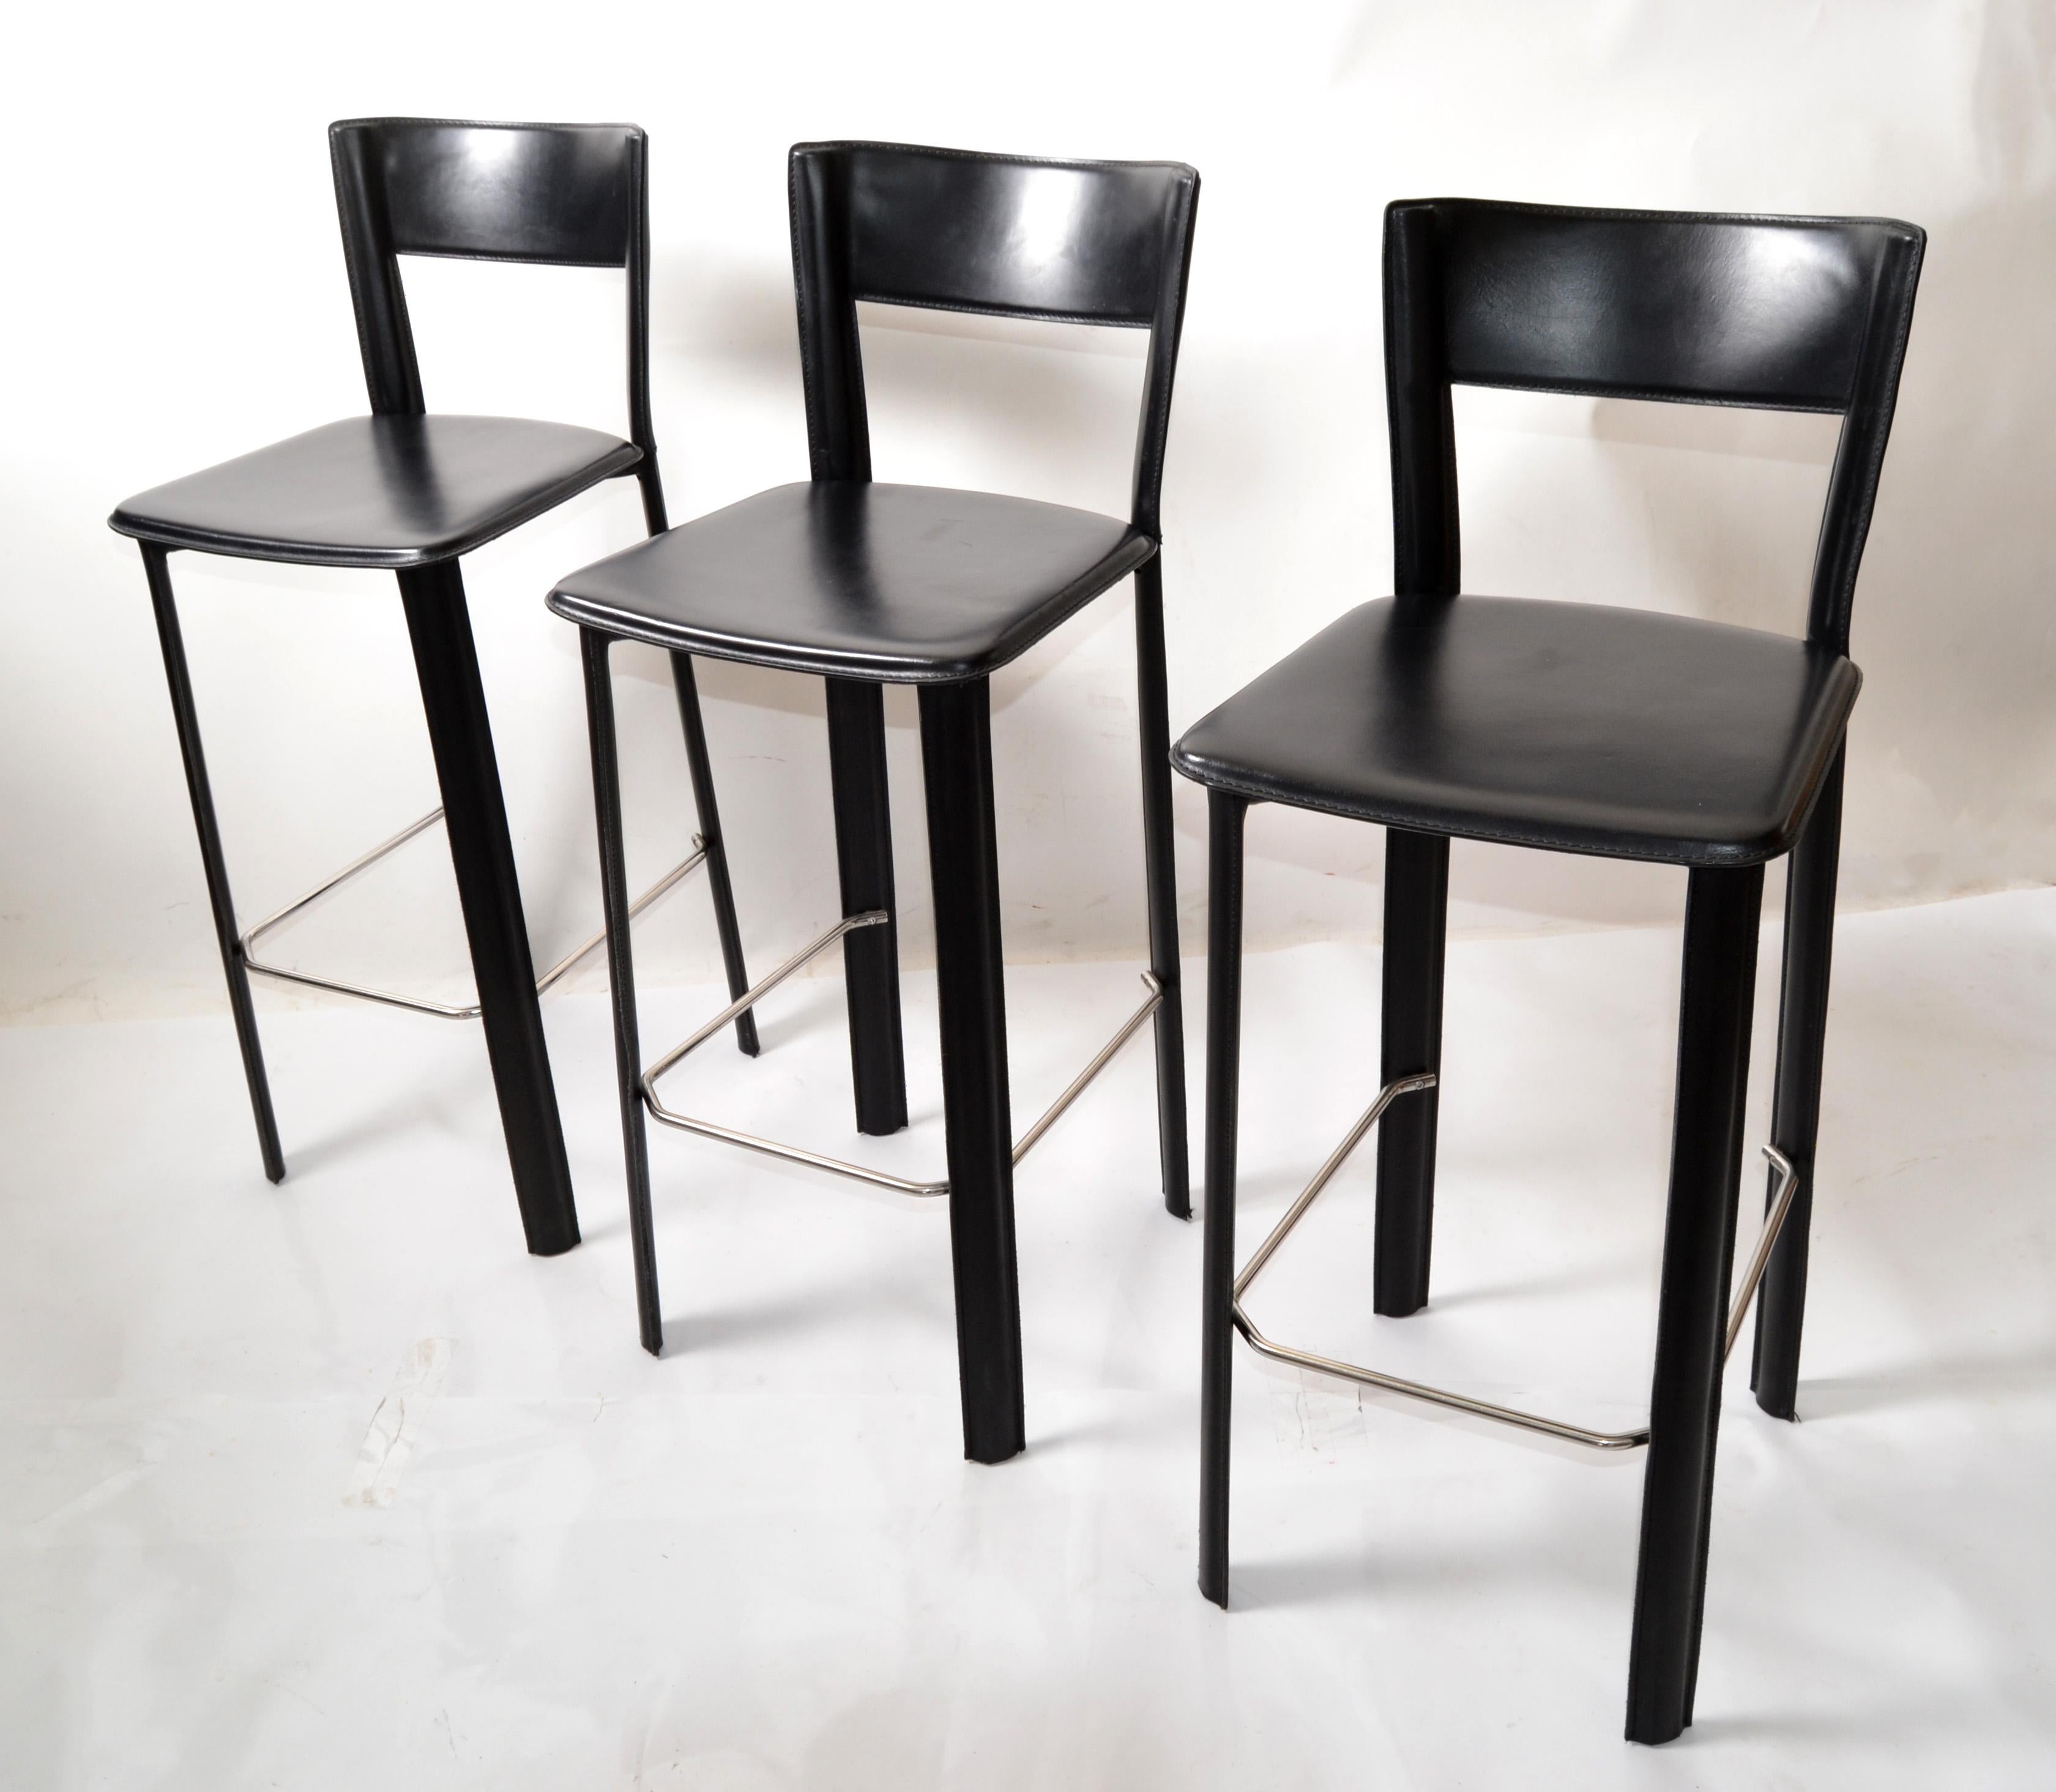 Set of 3 Italian Hand Stitched Frag Black Leather Chrome Bar Stools Contemporary 1